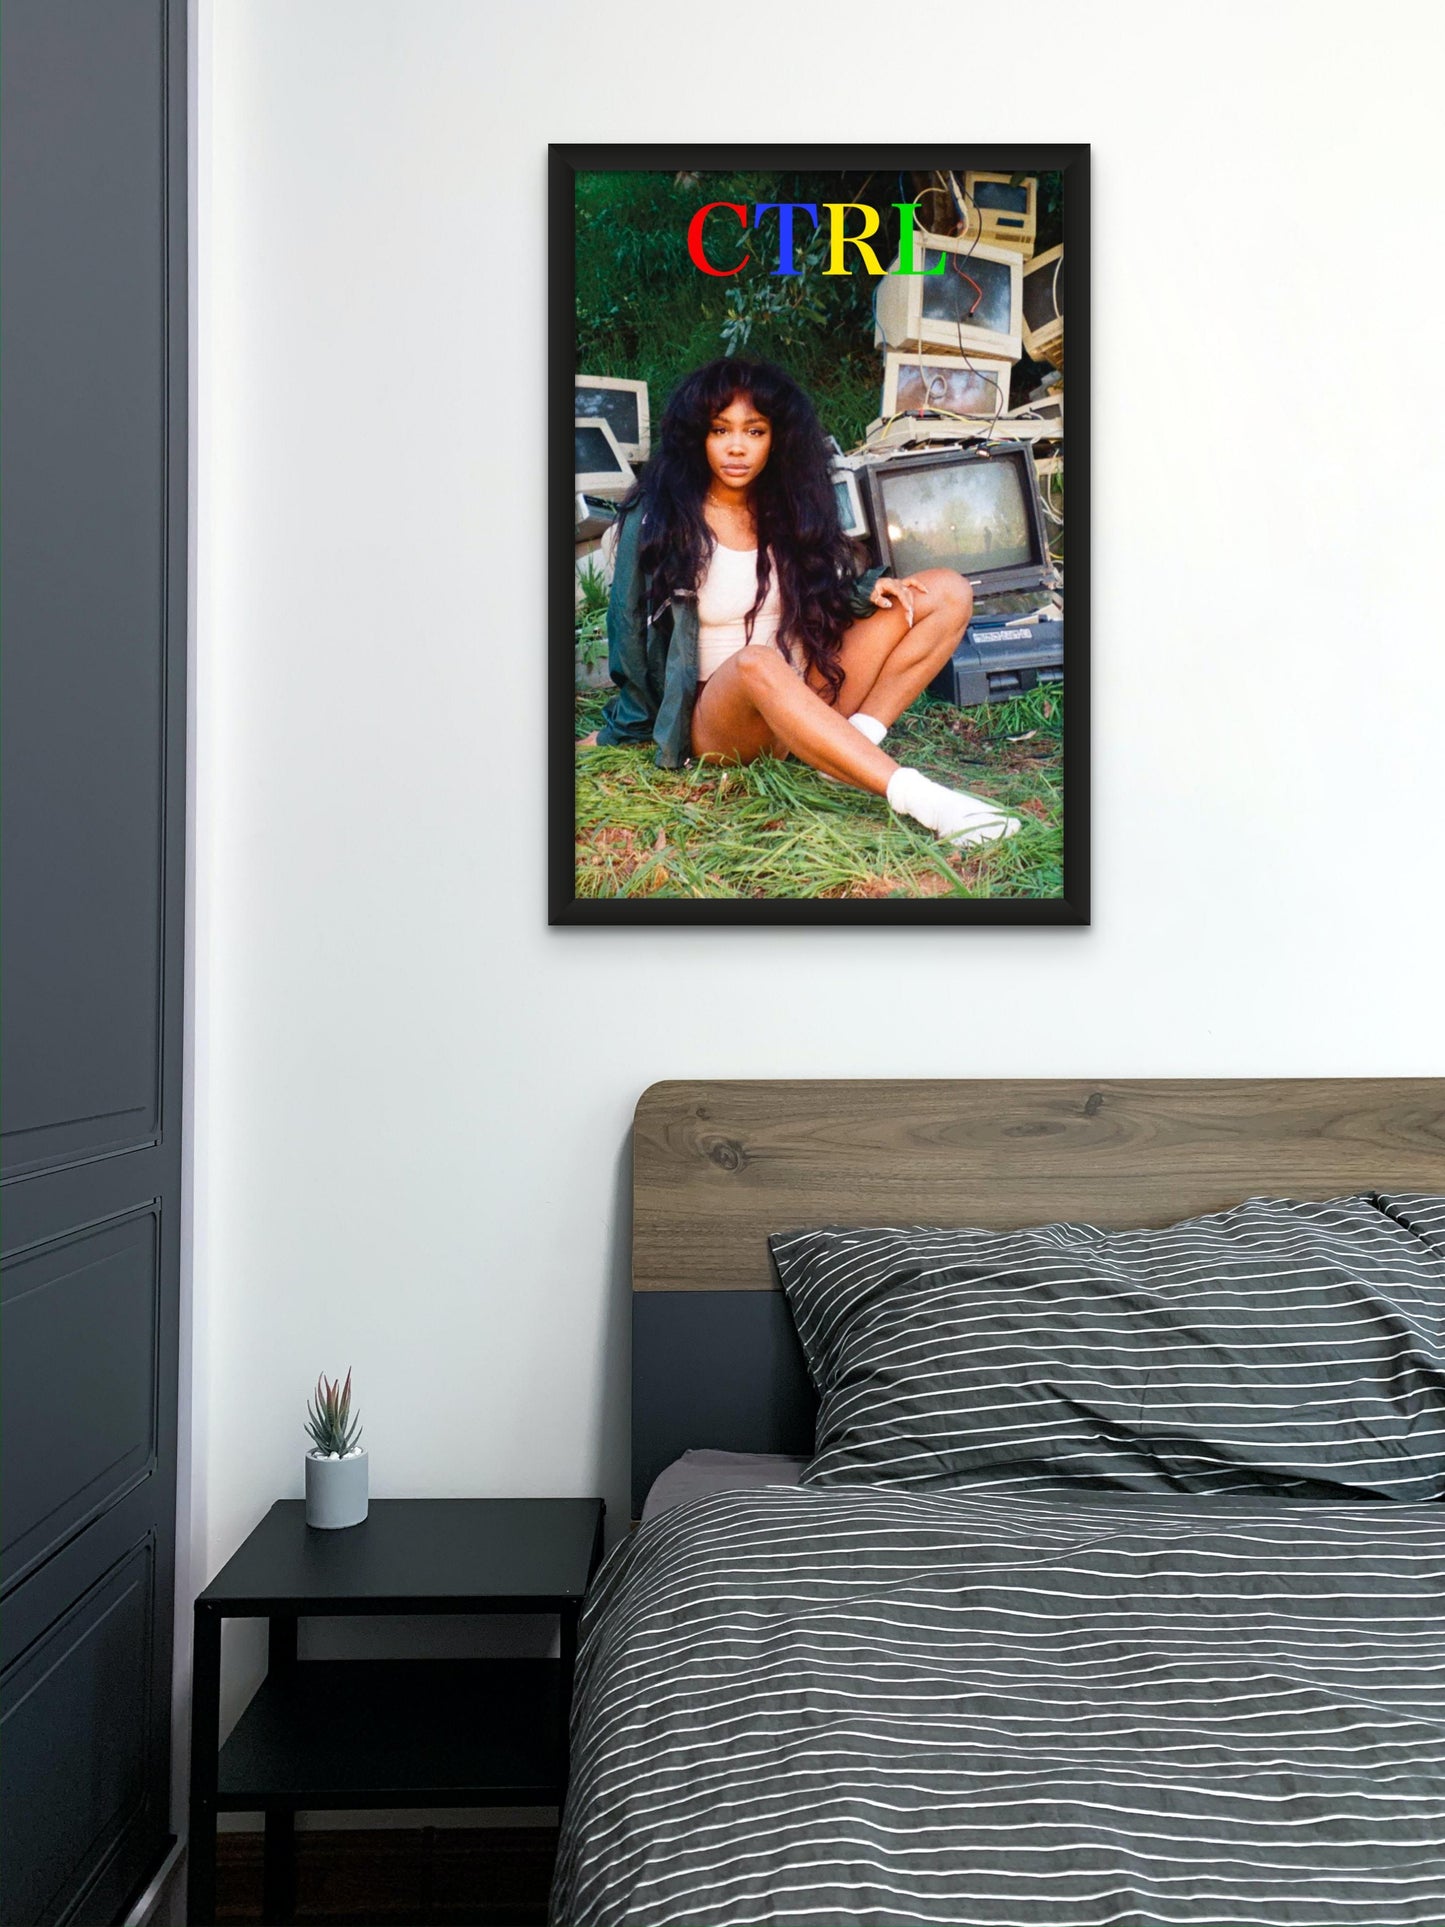 SZA - CTRL Album Art - Poster and Wrapped Canvas